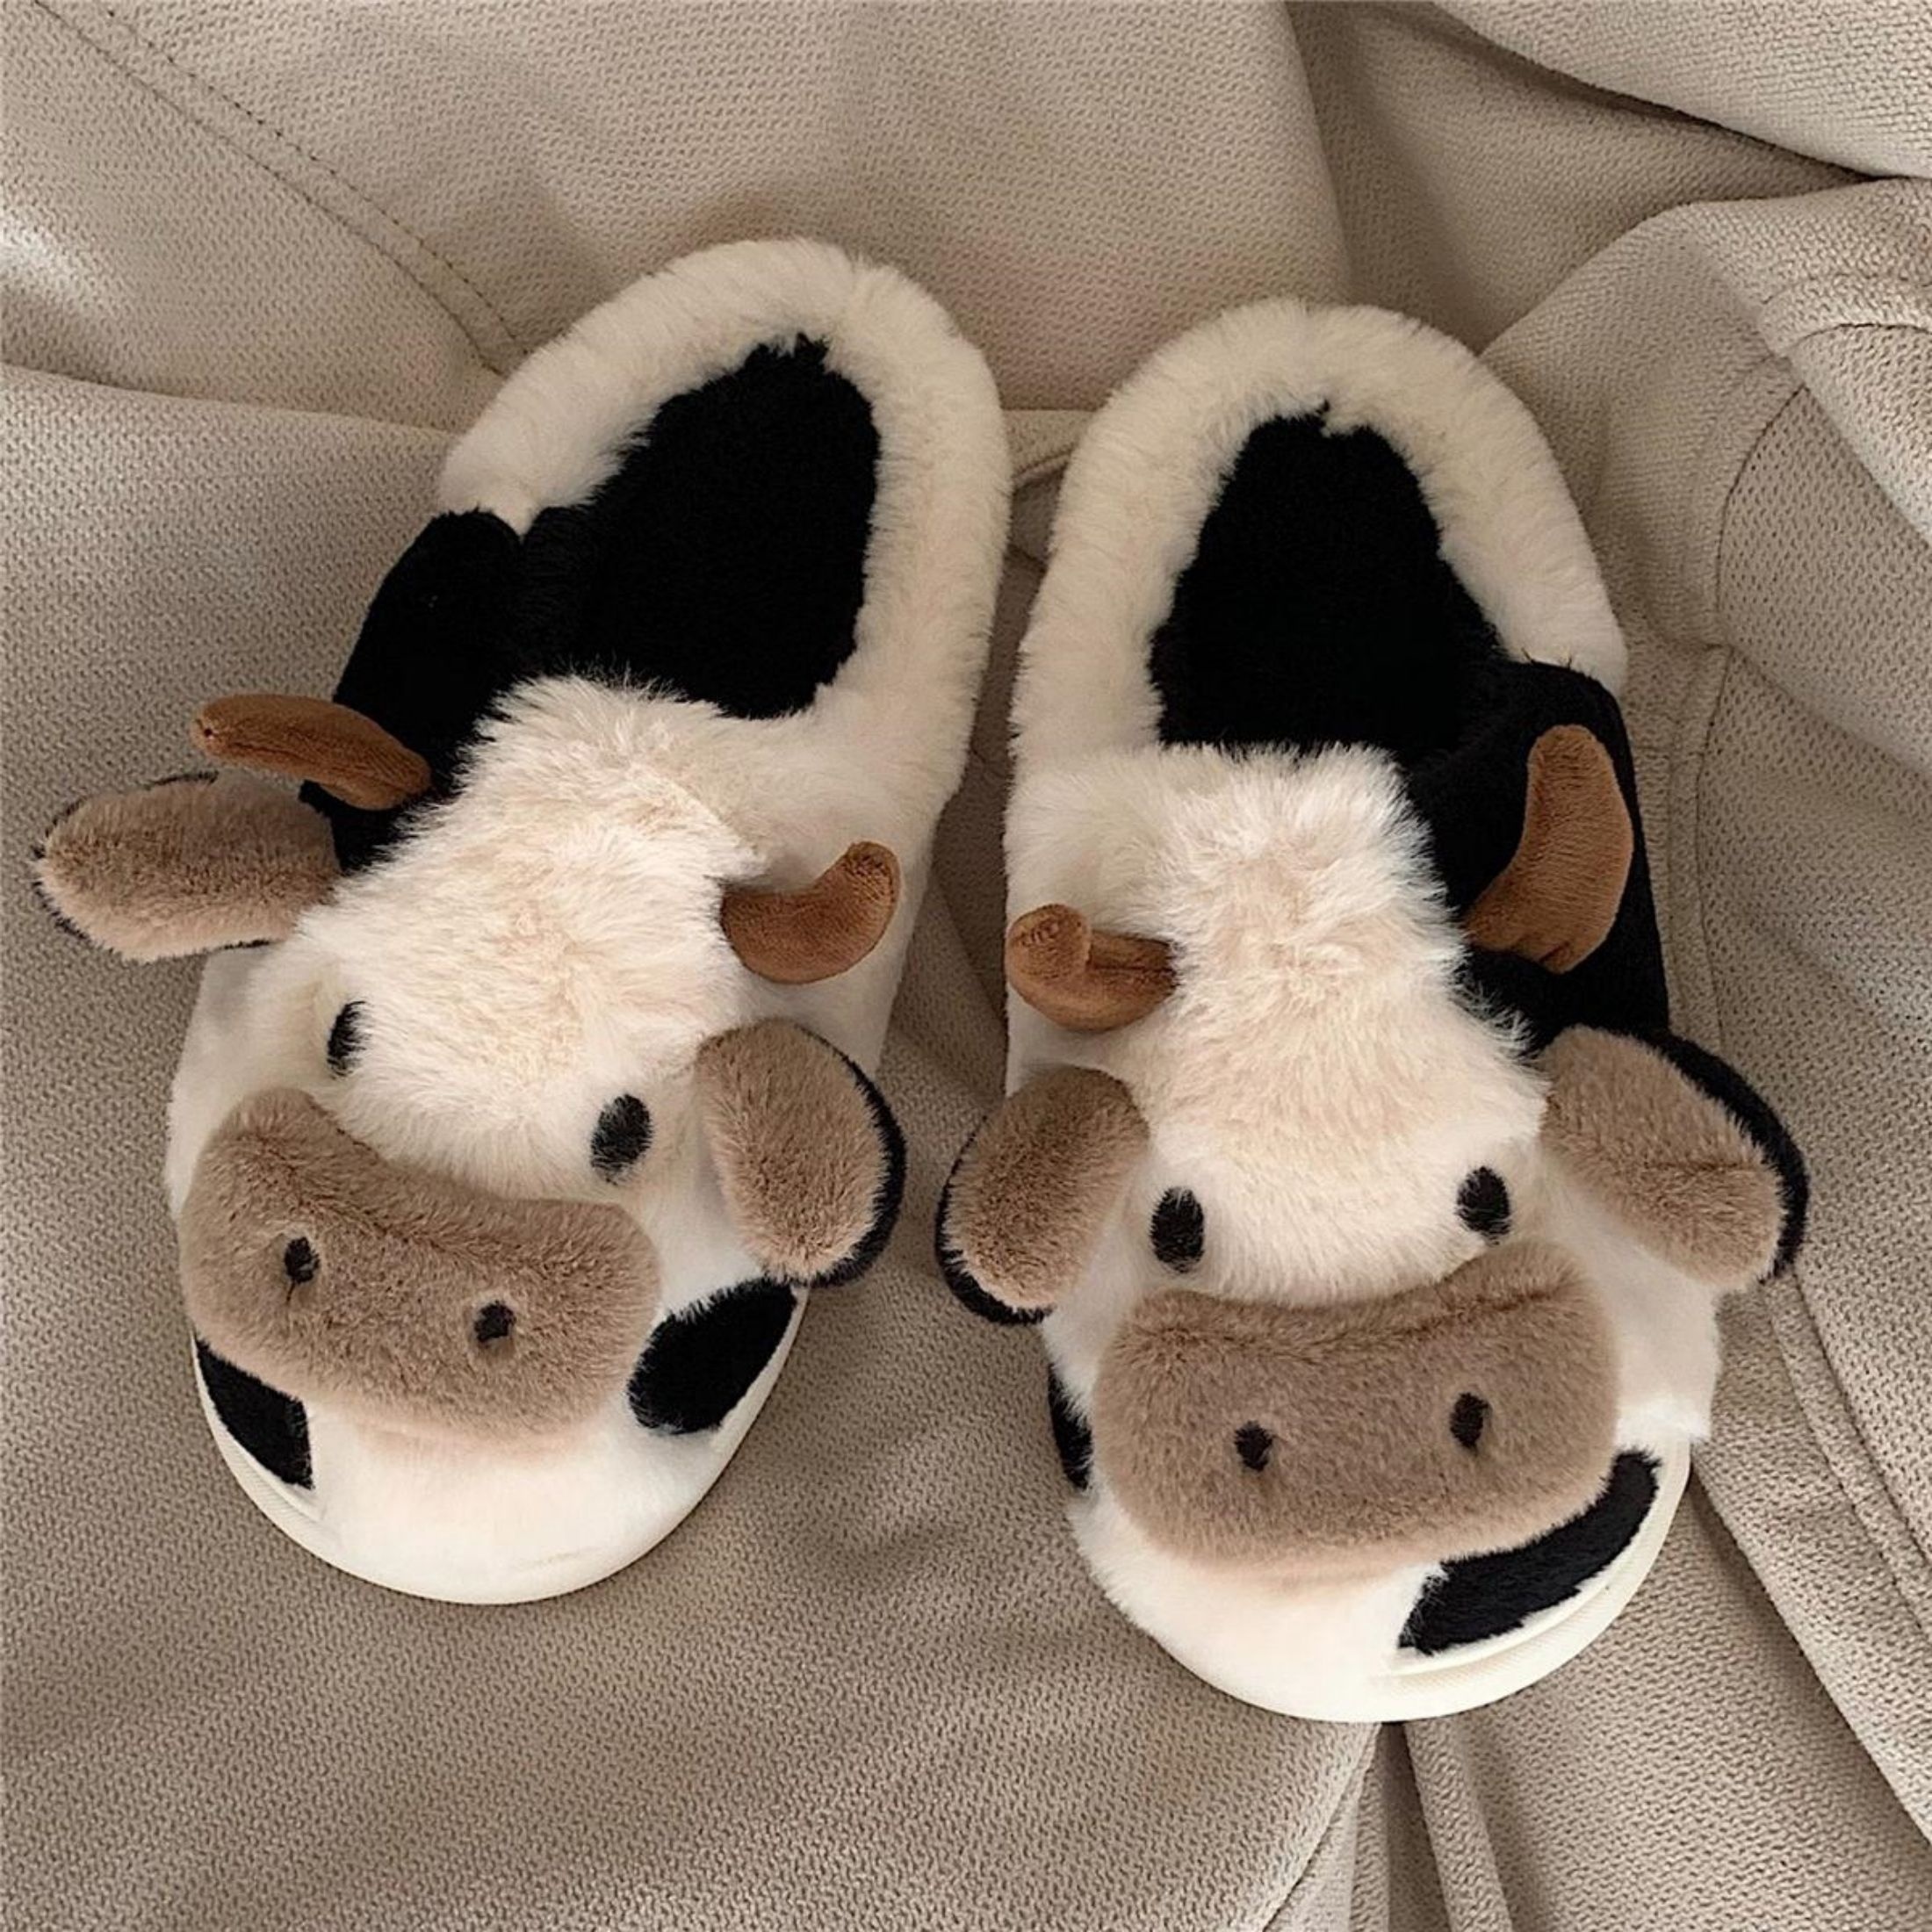 

Fuzzy Cute Cow Slippers For Women Winter Warm Cozy Animal Fluffy Kawaii House Slippers Cute Slippers